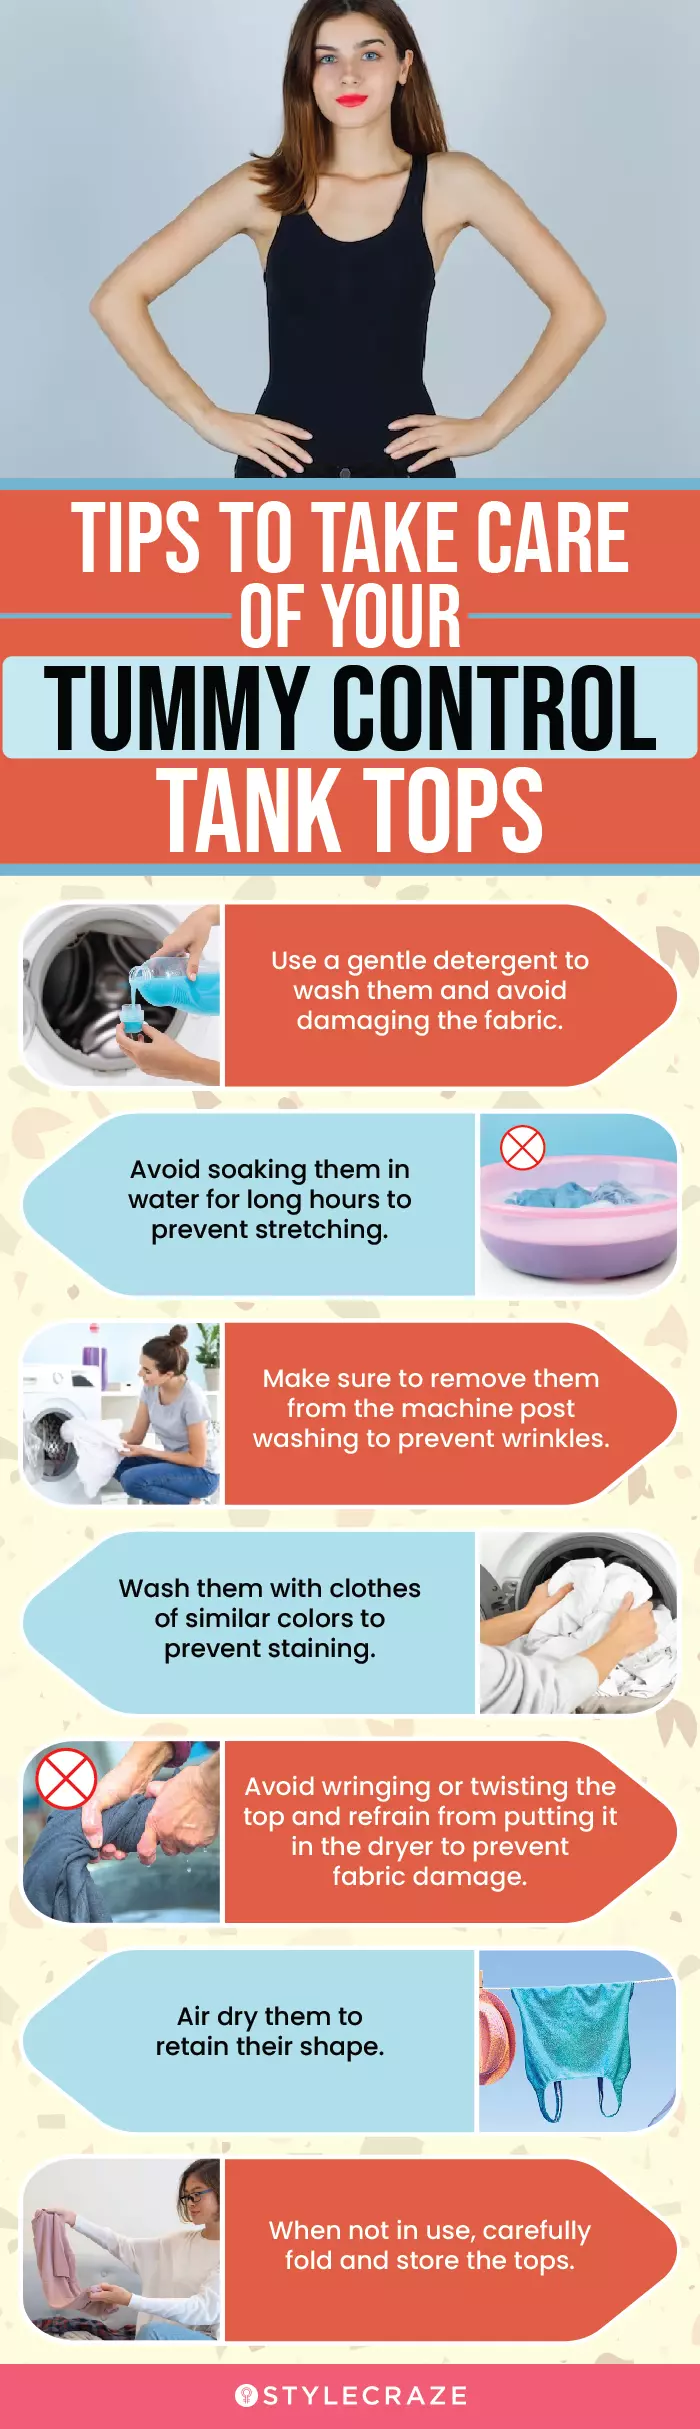 Tips To Take Care Of Your Tummy Control Tank Tops (infographic)